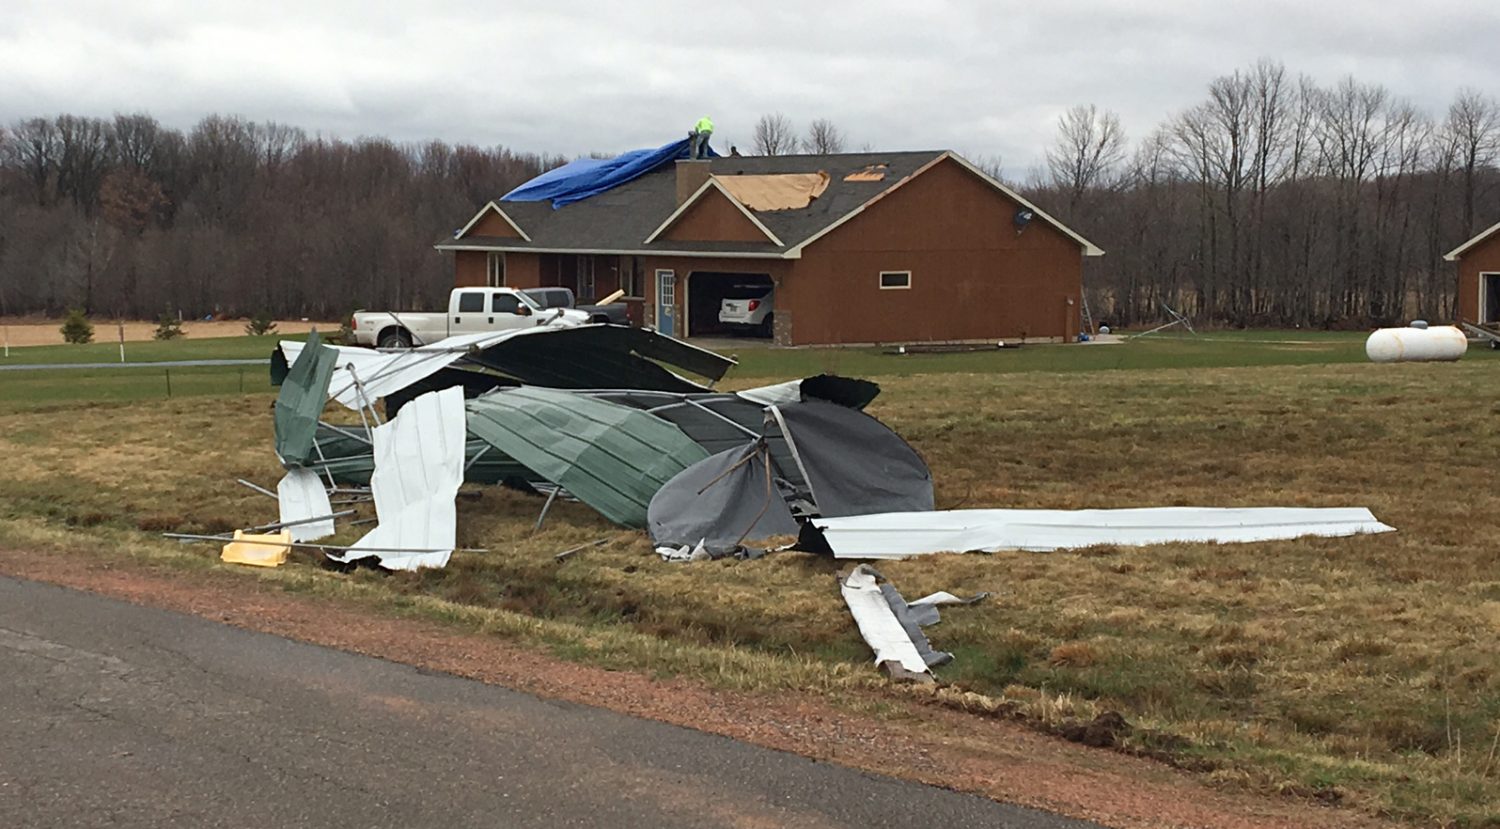 One home in the Sloping Meadow area experienced structural damage from high winds.